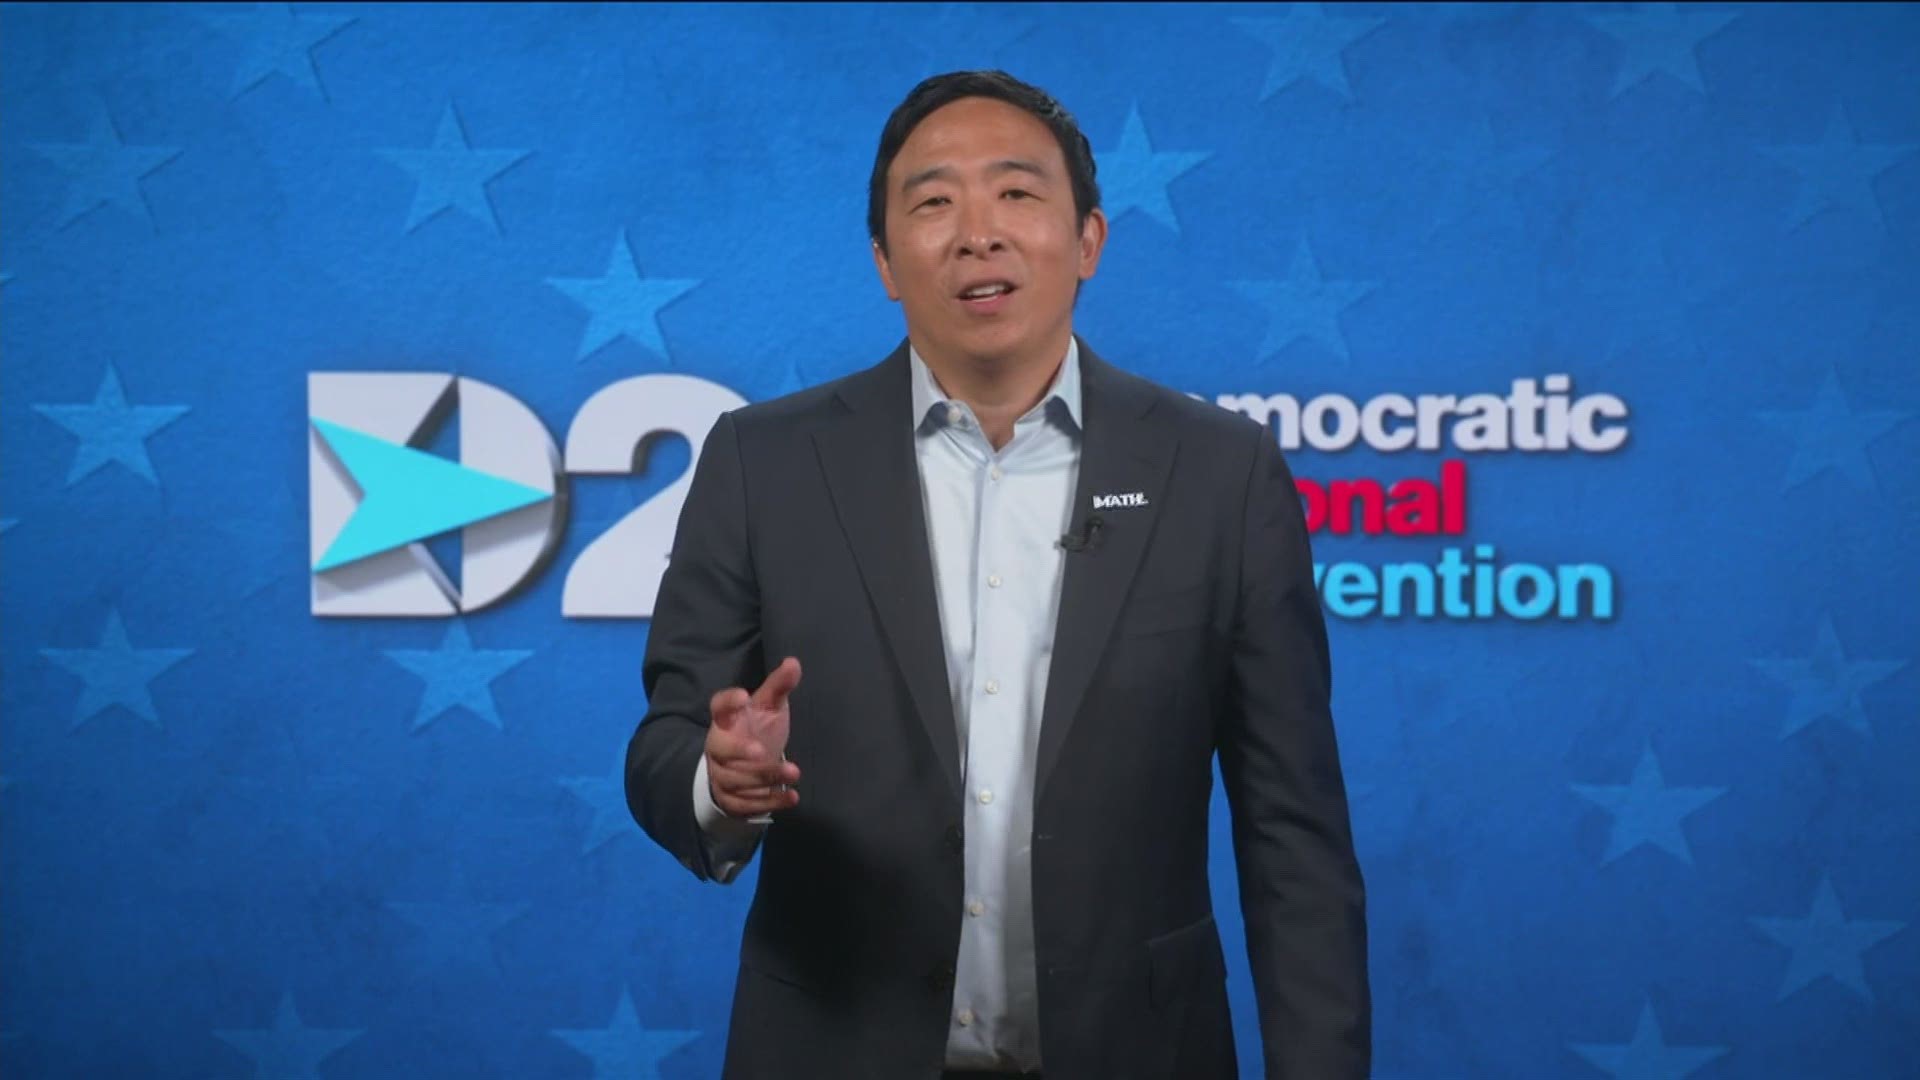 Former presidential candidate Andrew Yang opened the final night of the Democratic National Convention.